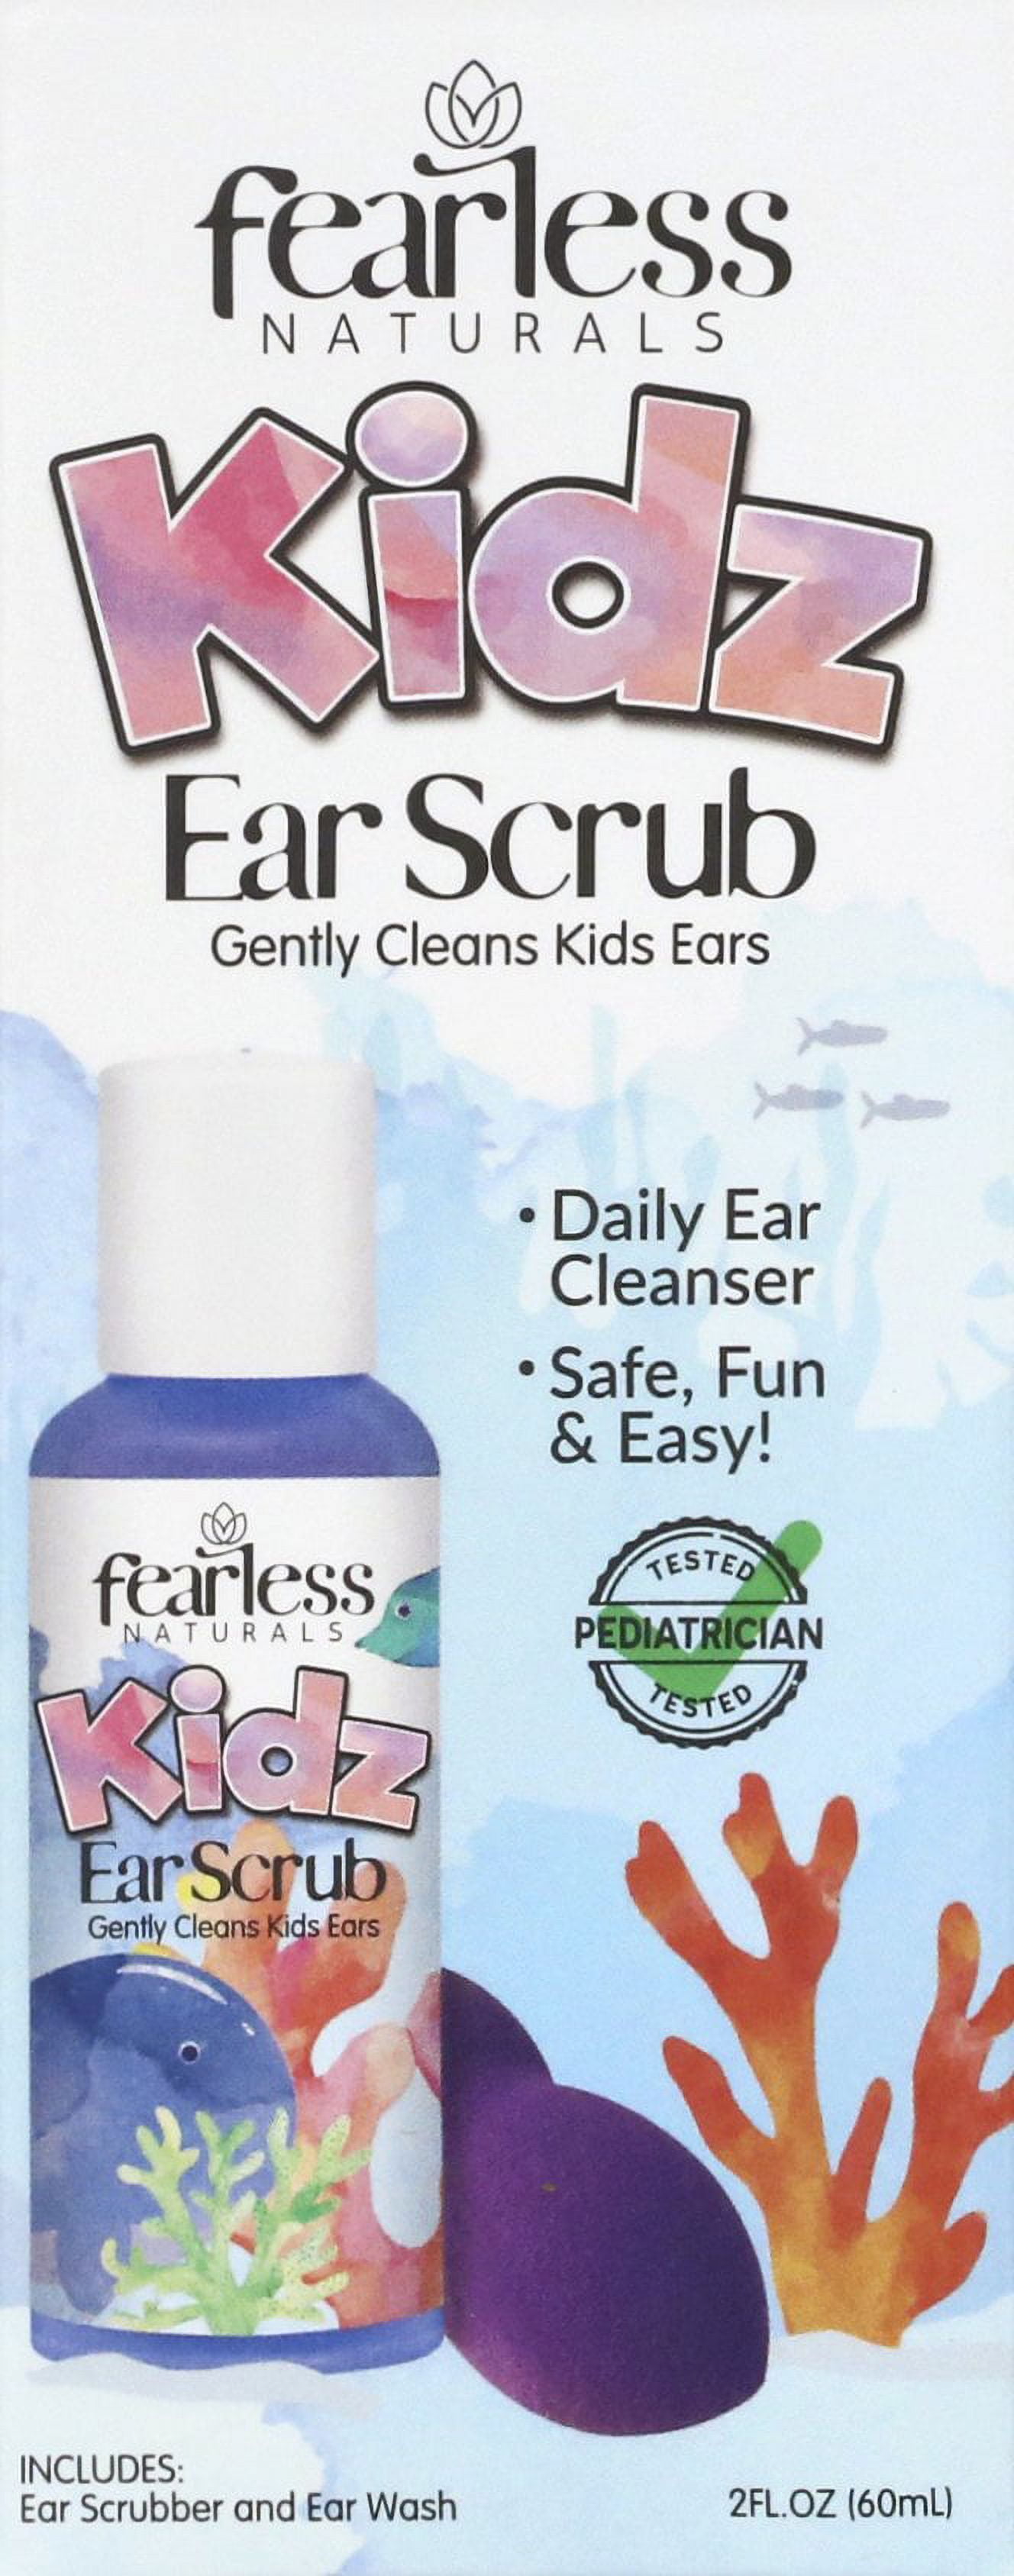 Safe Ear Cleaning: Wally's Natural Kid's Ear Scrub + Giveaway - Mommy's  Block Party